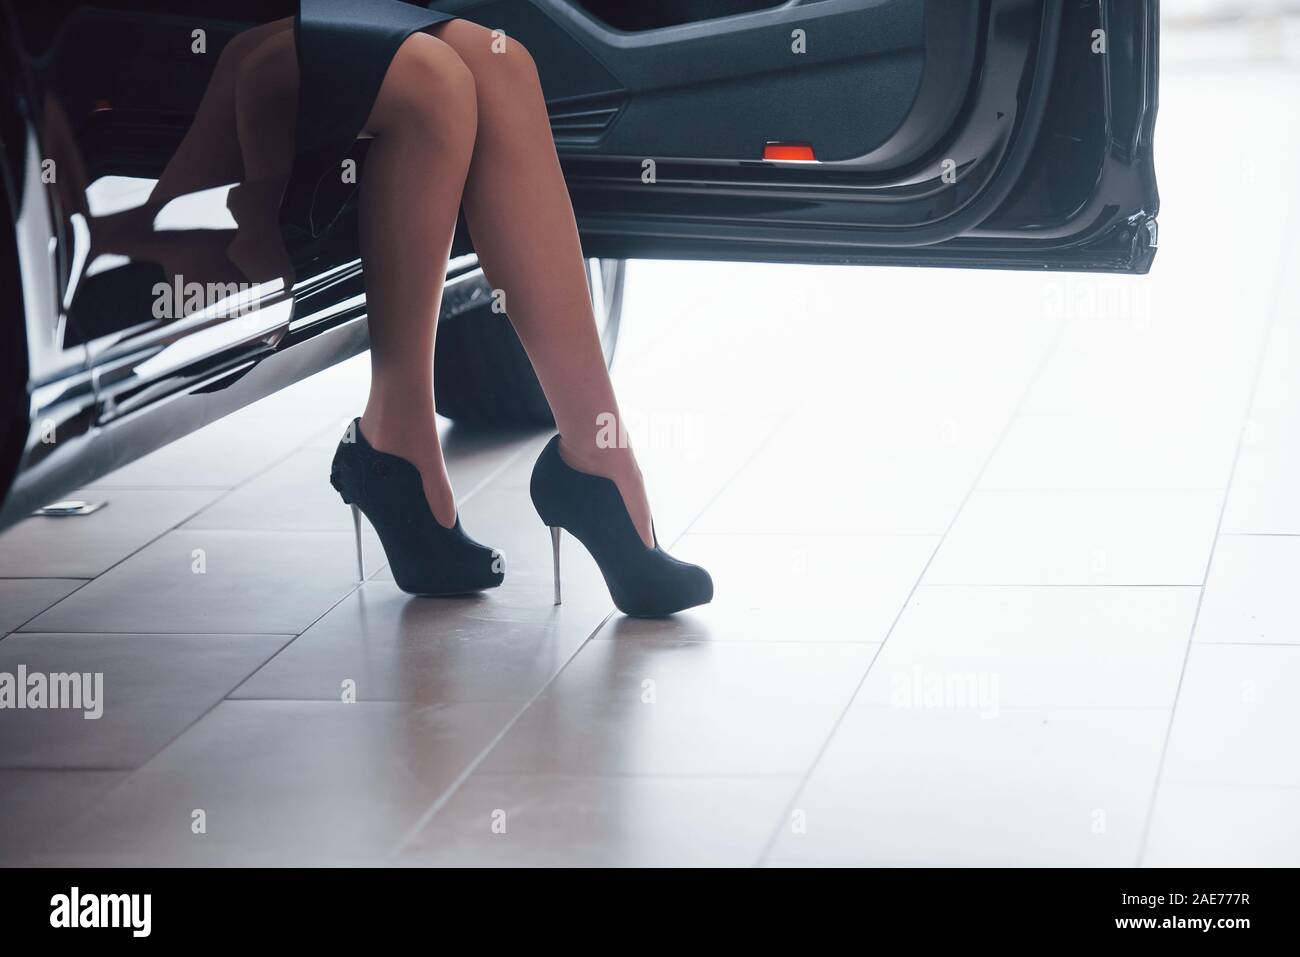 High Heels Car High Resolution Stock Photography and Images - Alamy